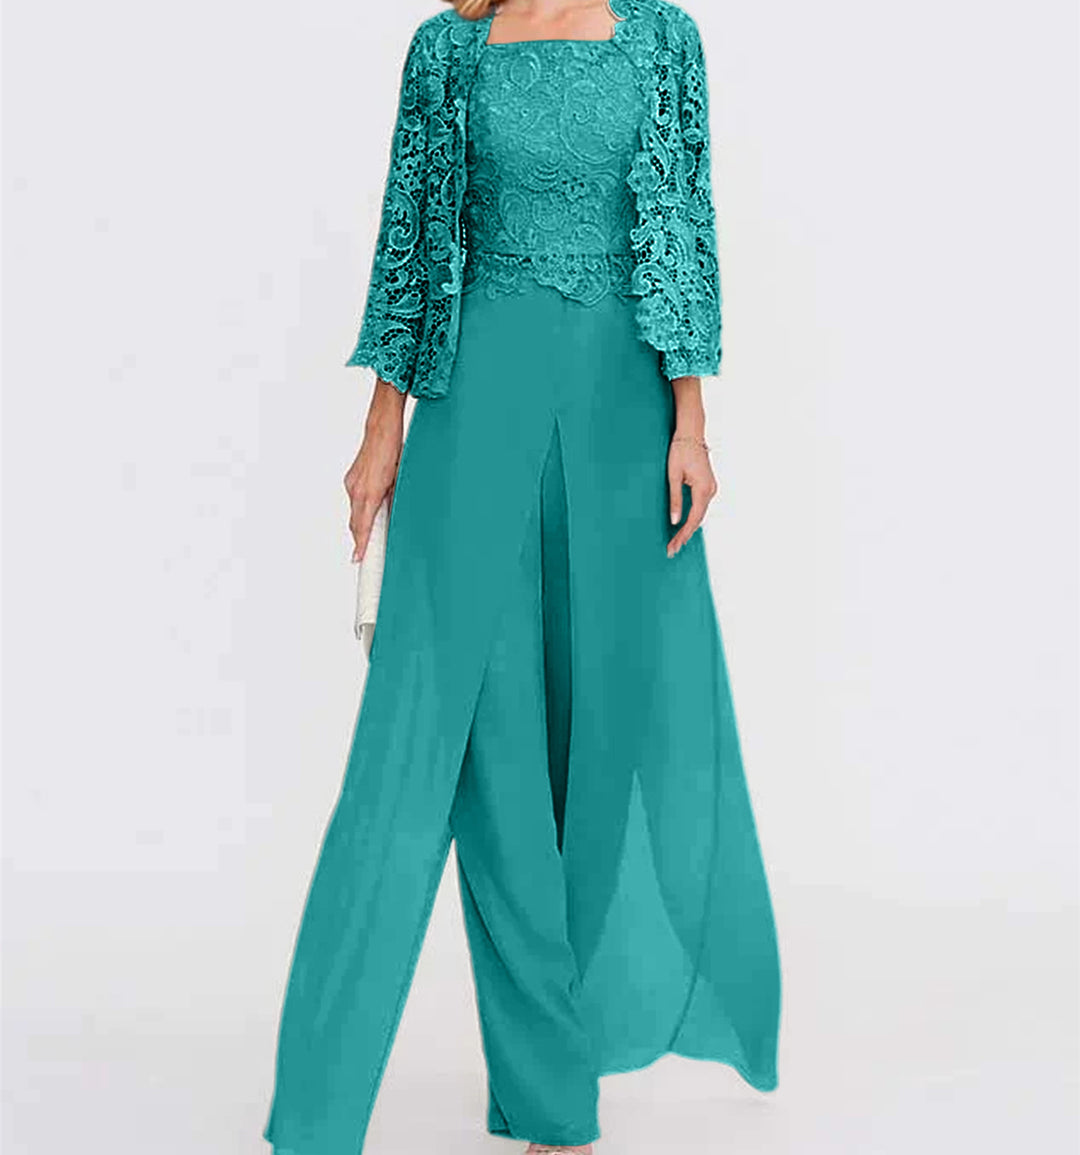 Chiffon Long Sleeves Mother of the Bride Pantsuits with Jacket & Lace